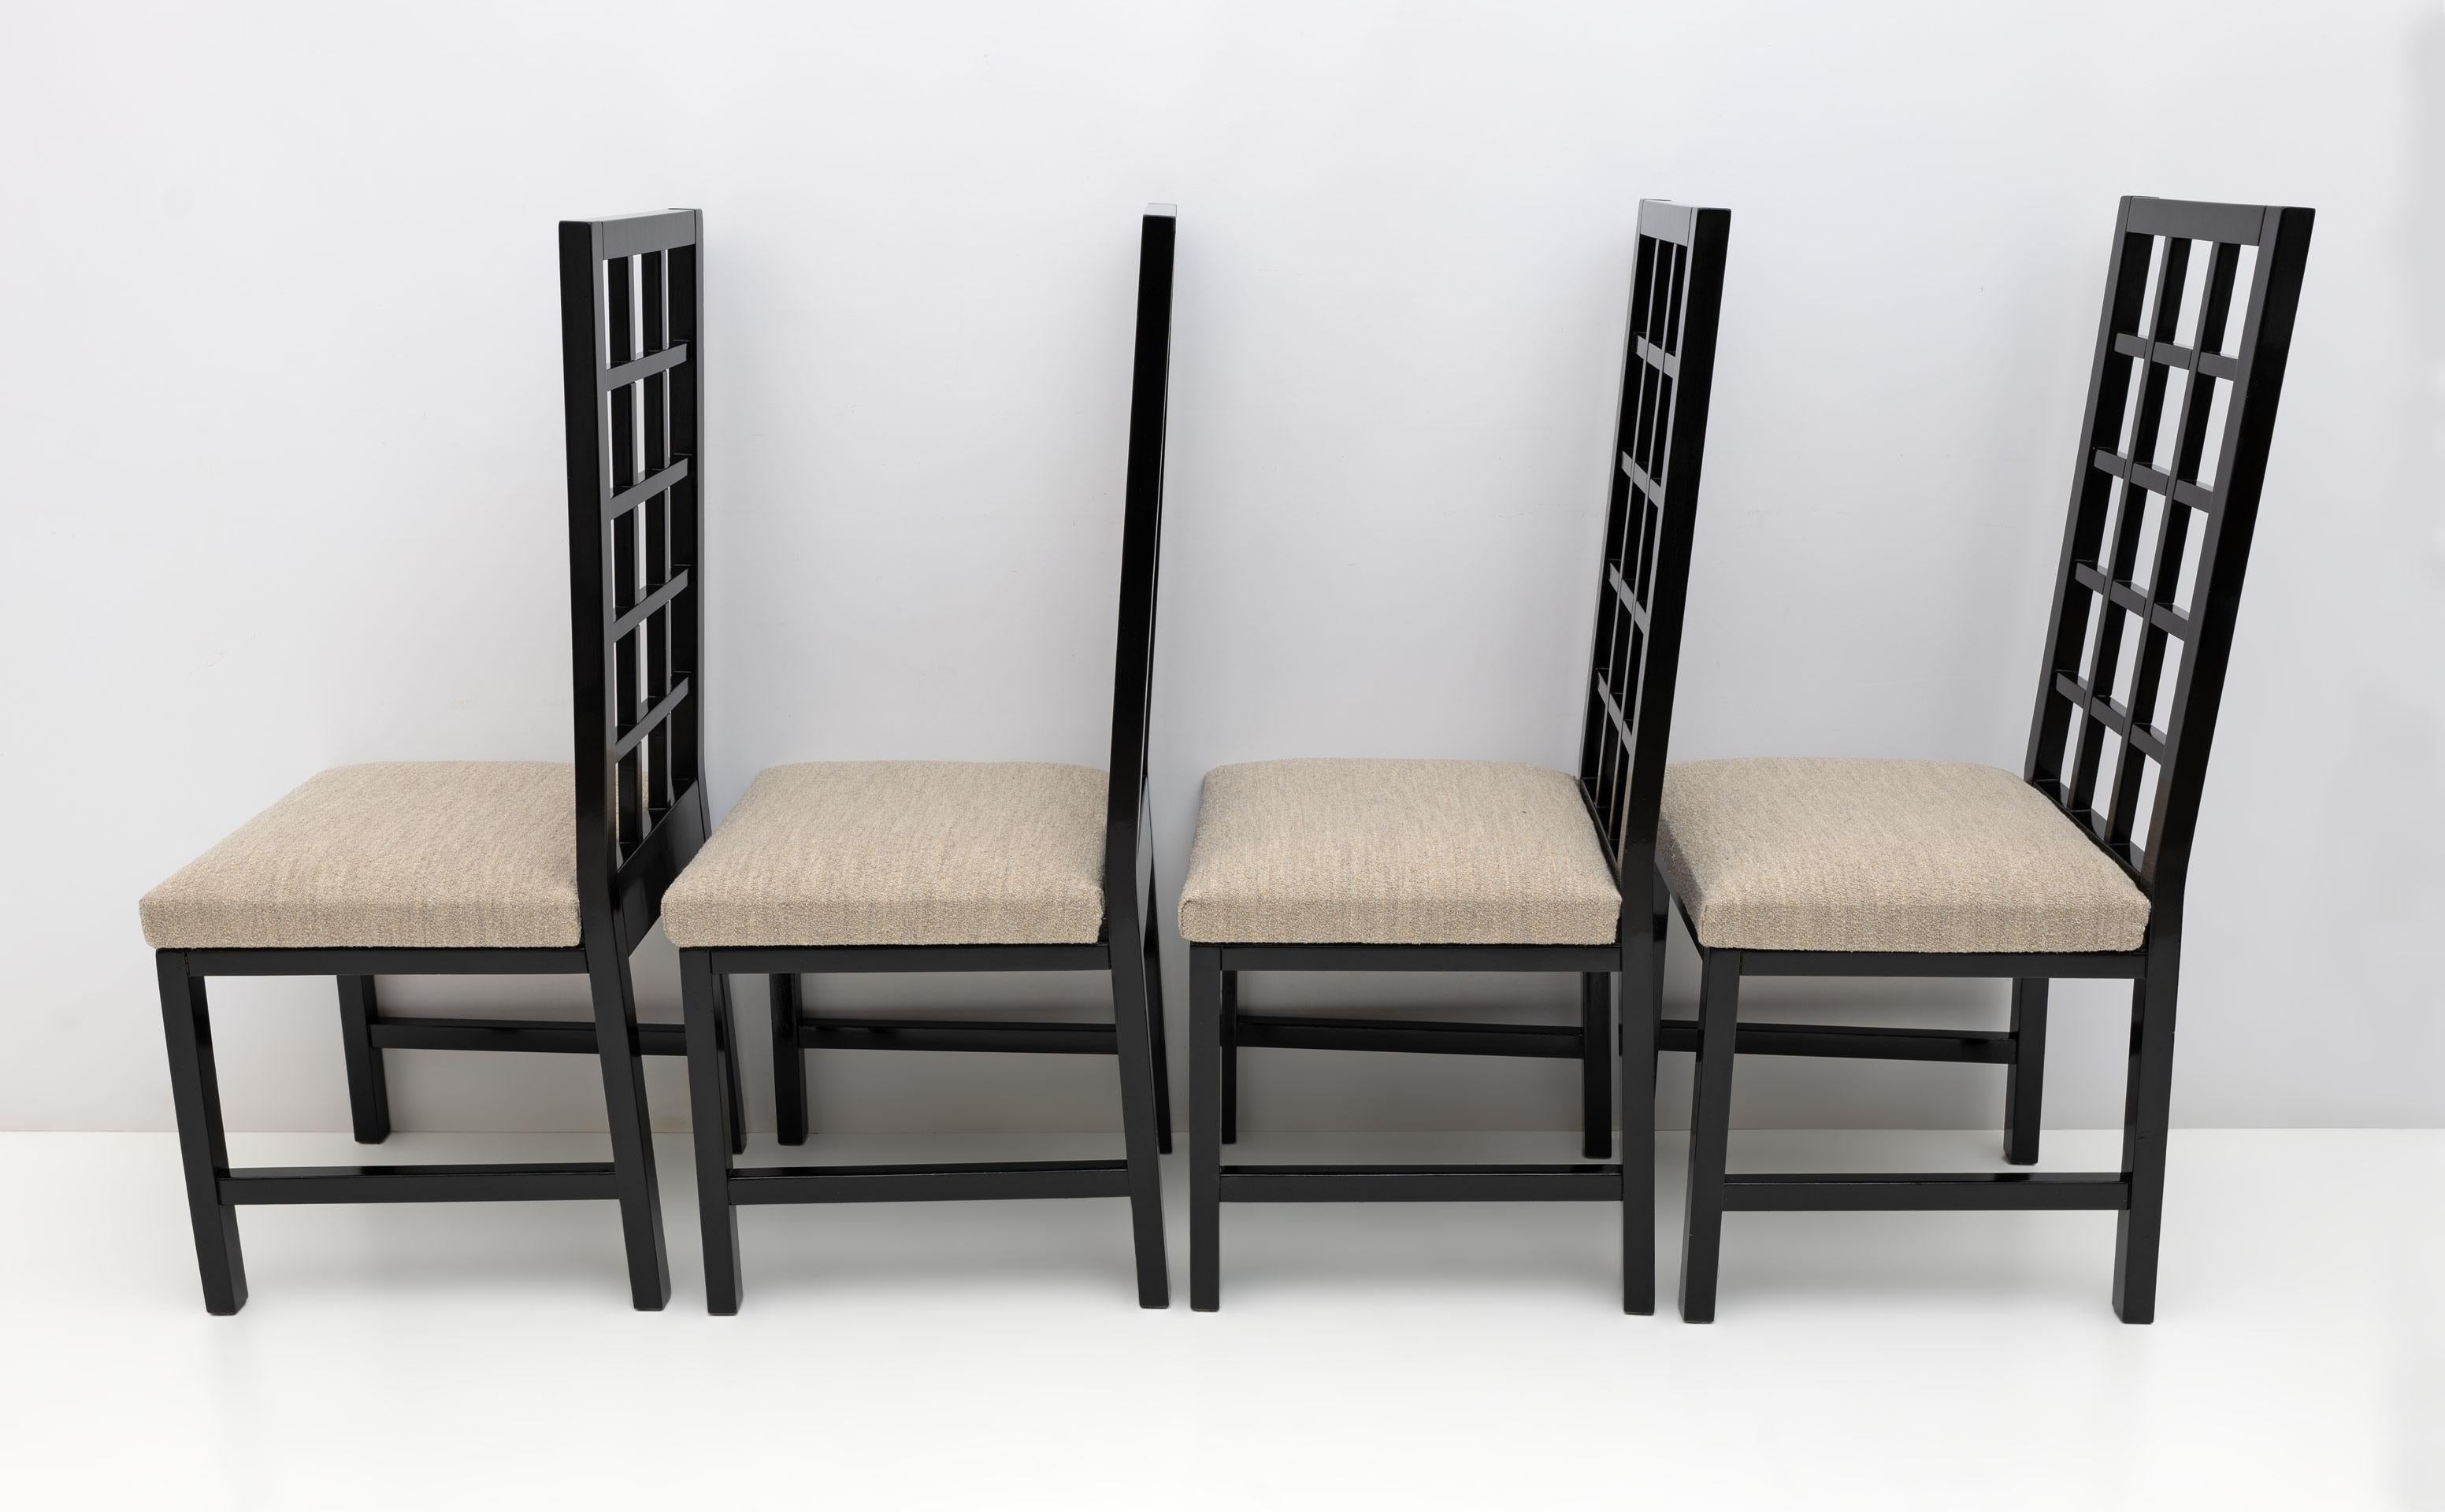 Four Mackintosh Style Black Lacquered High Back Chairs, 1979 For Sale 1